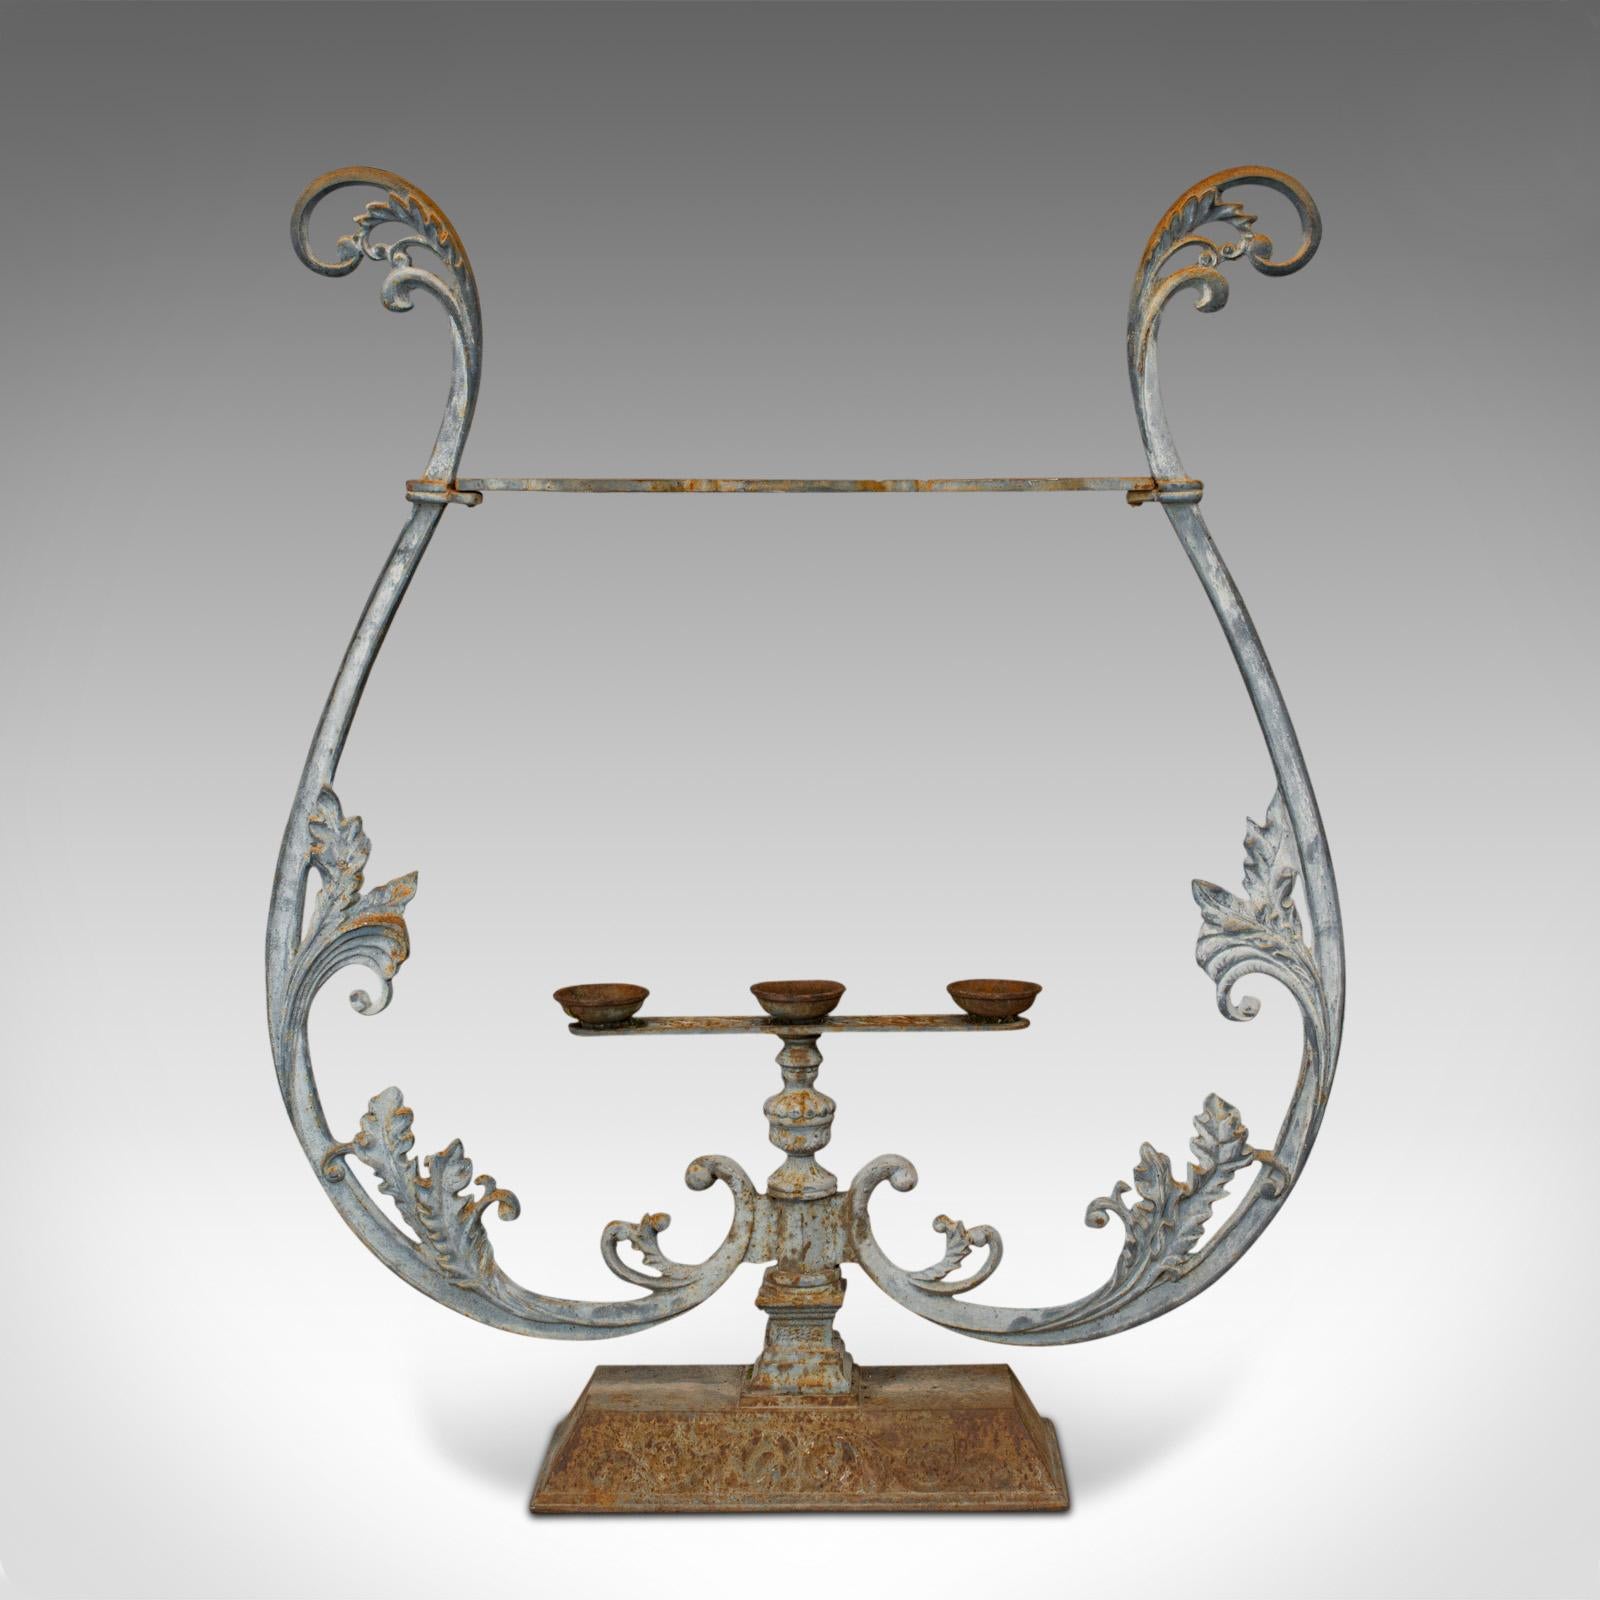 This is a vintage outdoor stand. A French, cast iron planter or stick stand with Art Nouveau taste, dating to the mid-20th century, circa 1950.

Appealing foliate detail abounds
Displays a desirable aged patina
Cast iron finished in light